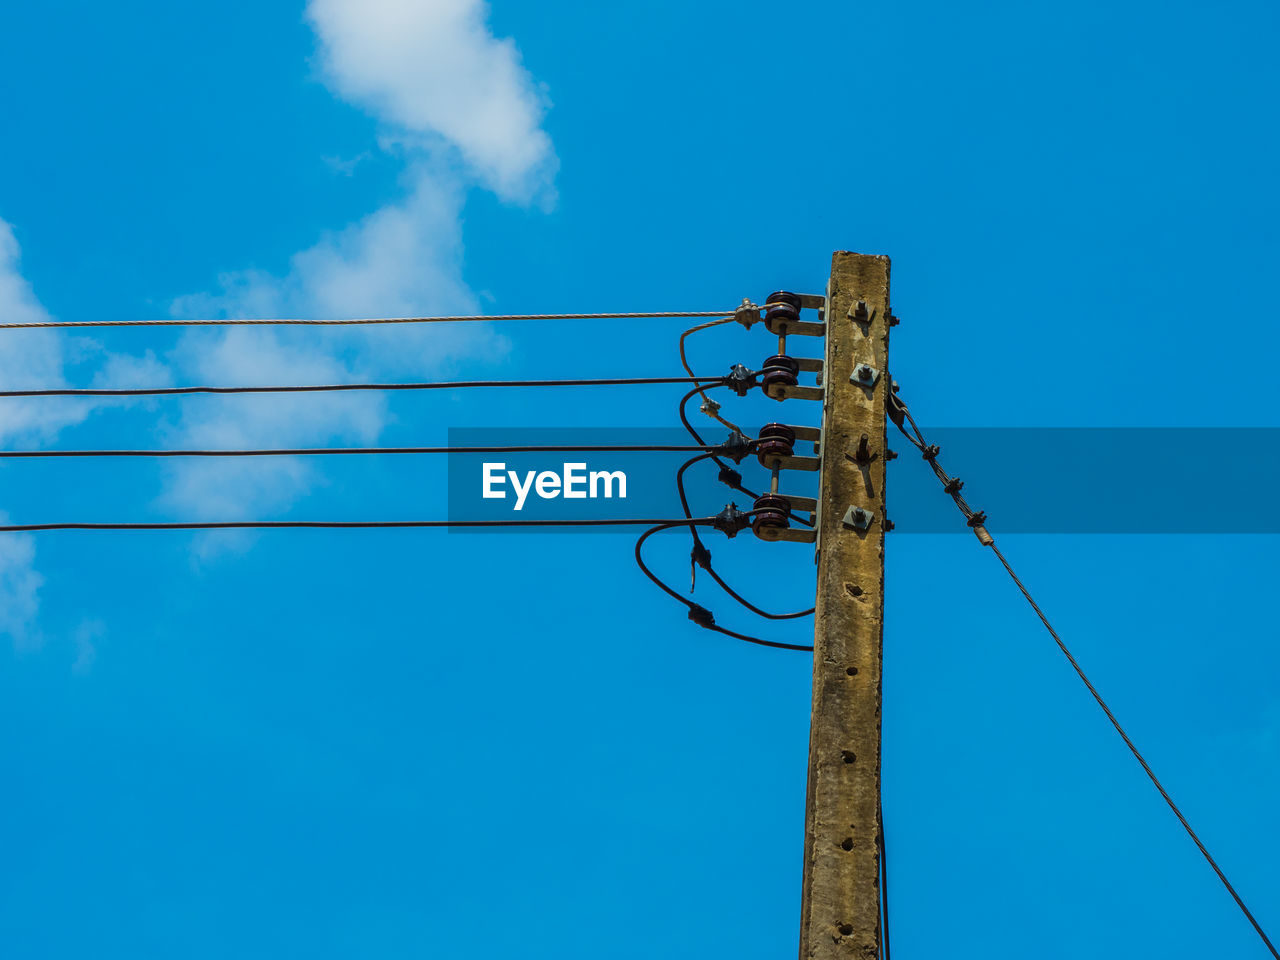 LOW ANGLE VIEW OF ELECTRICITY PYLON AGAINST SKY